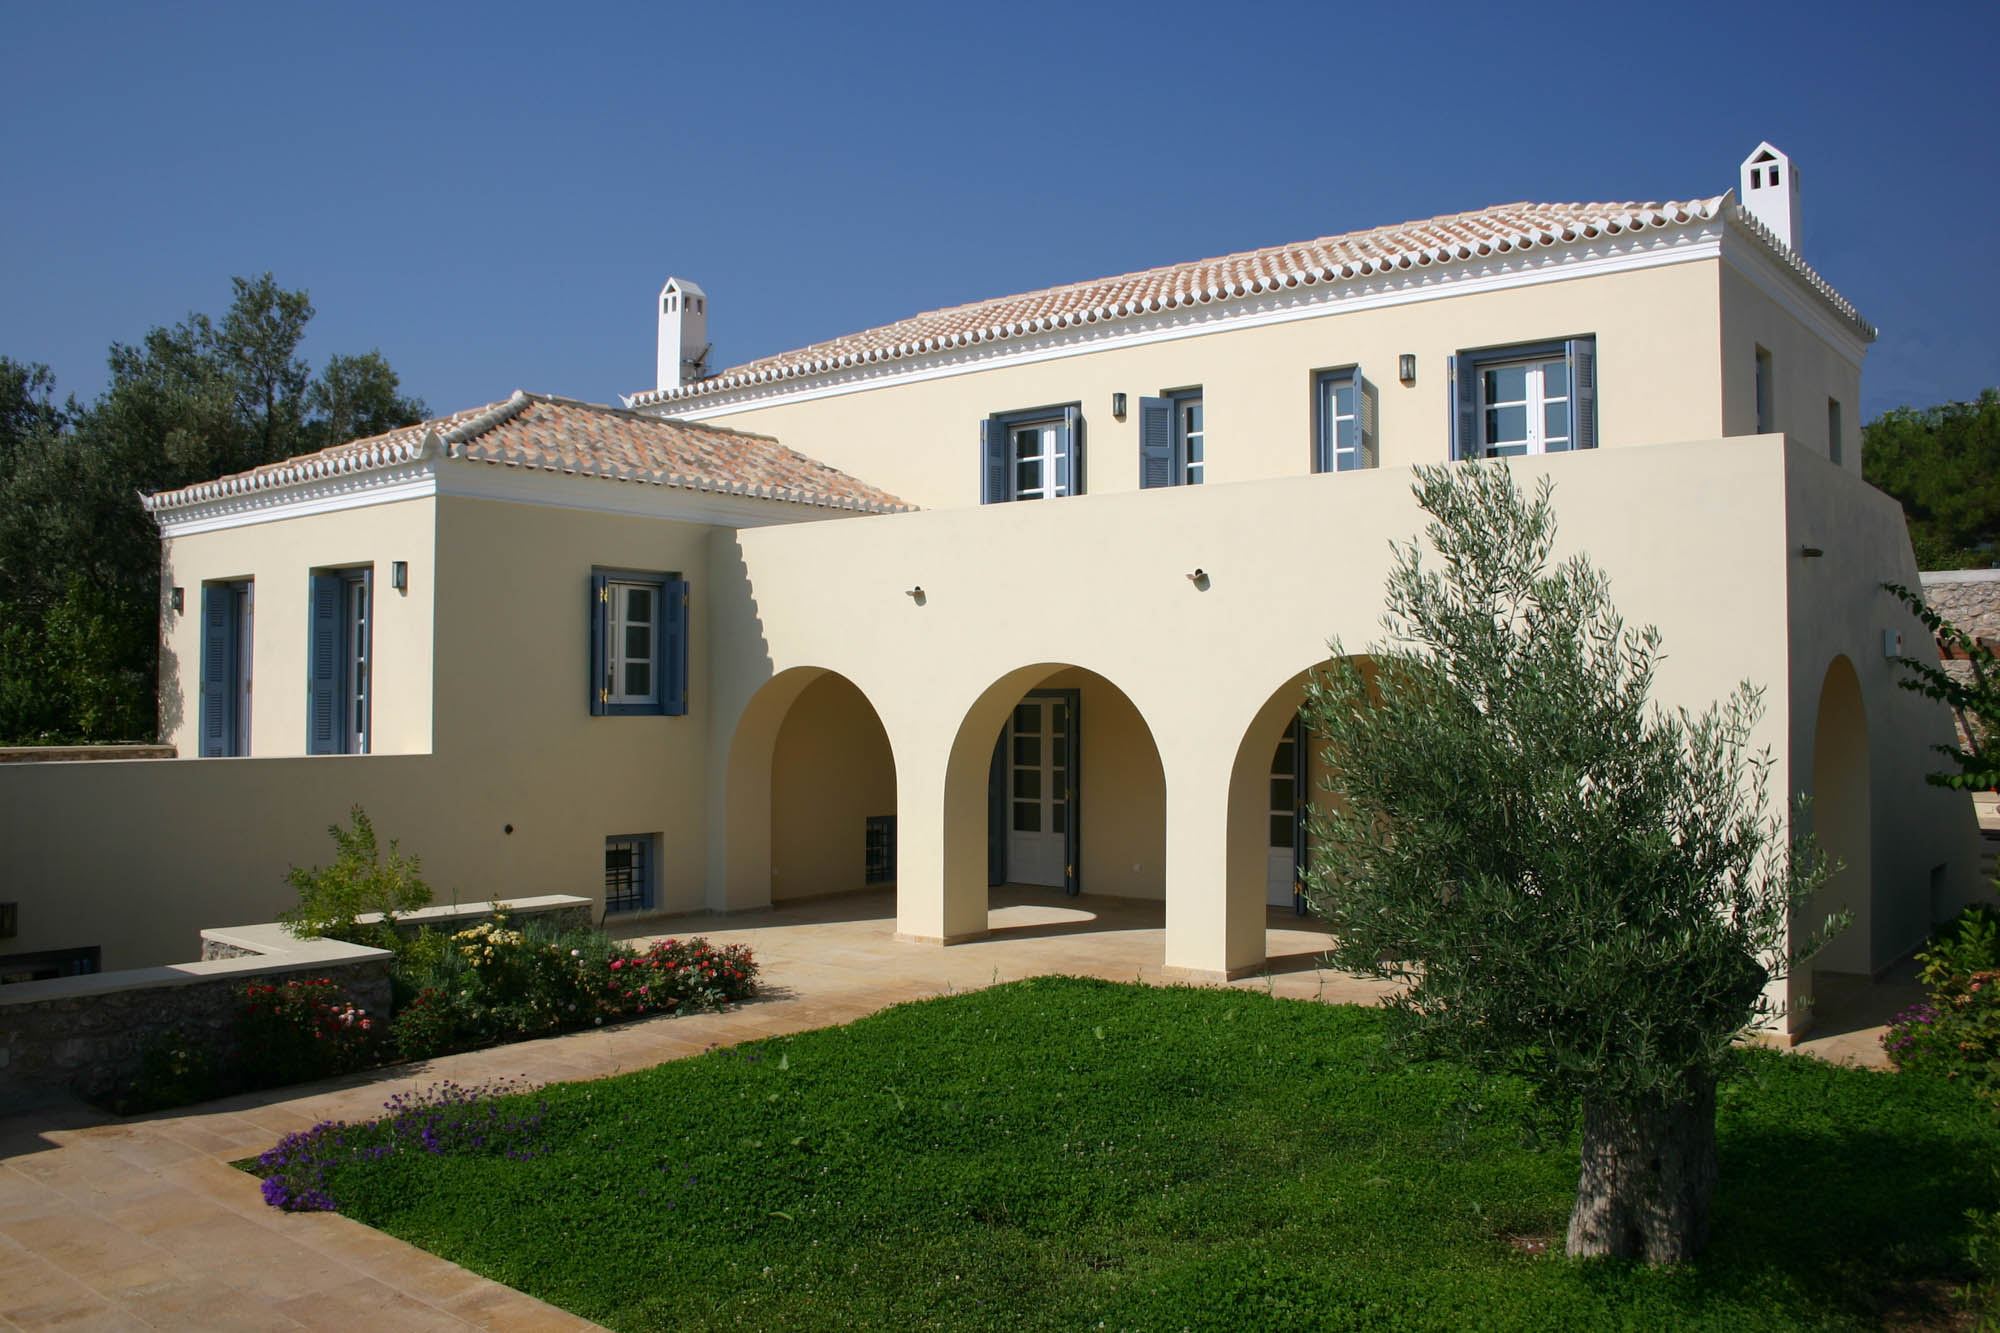 Moustroufis-Architects-Residence-NGM Vacation Houses in Spetses